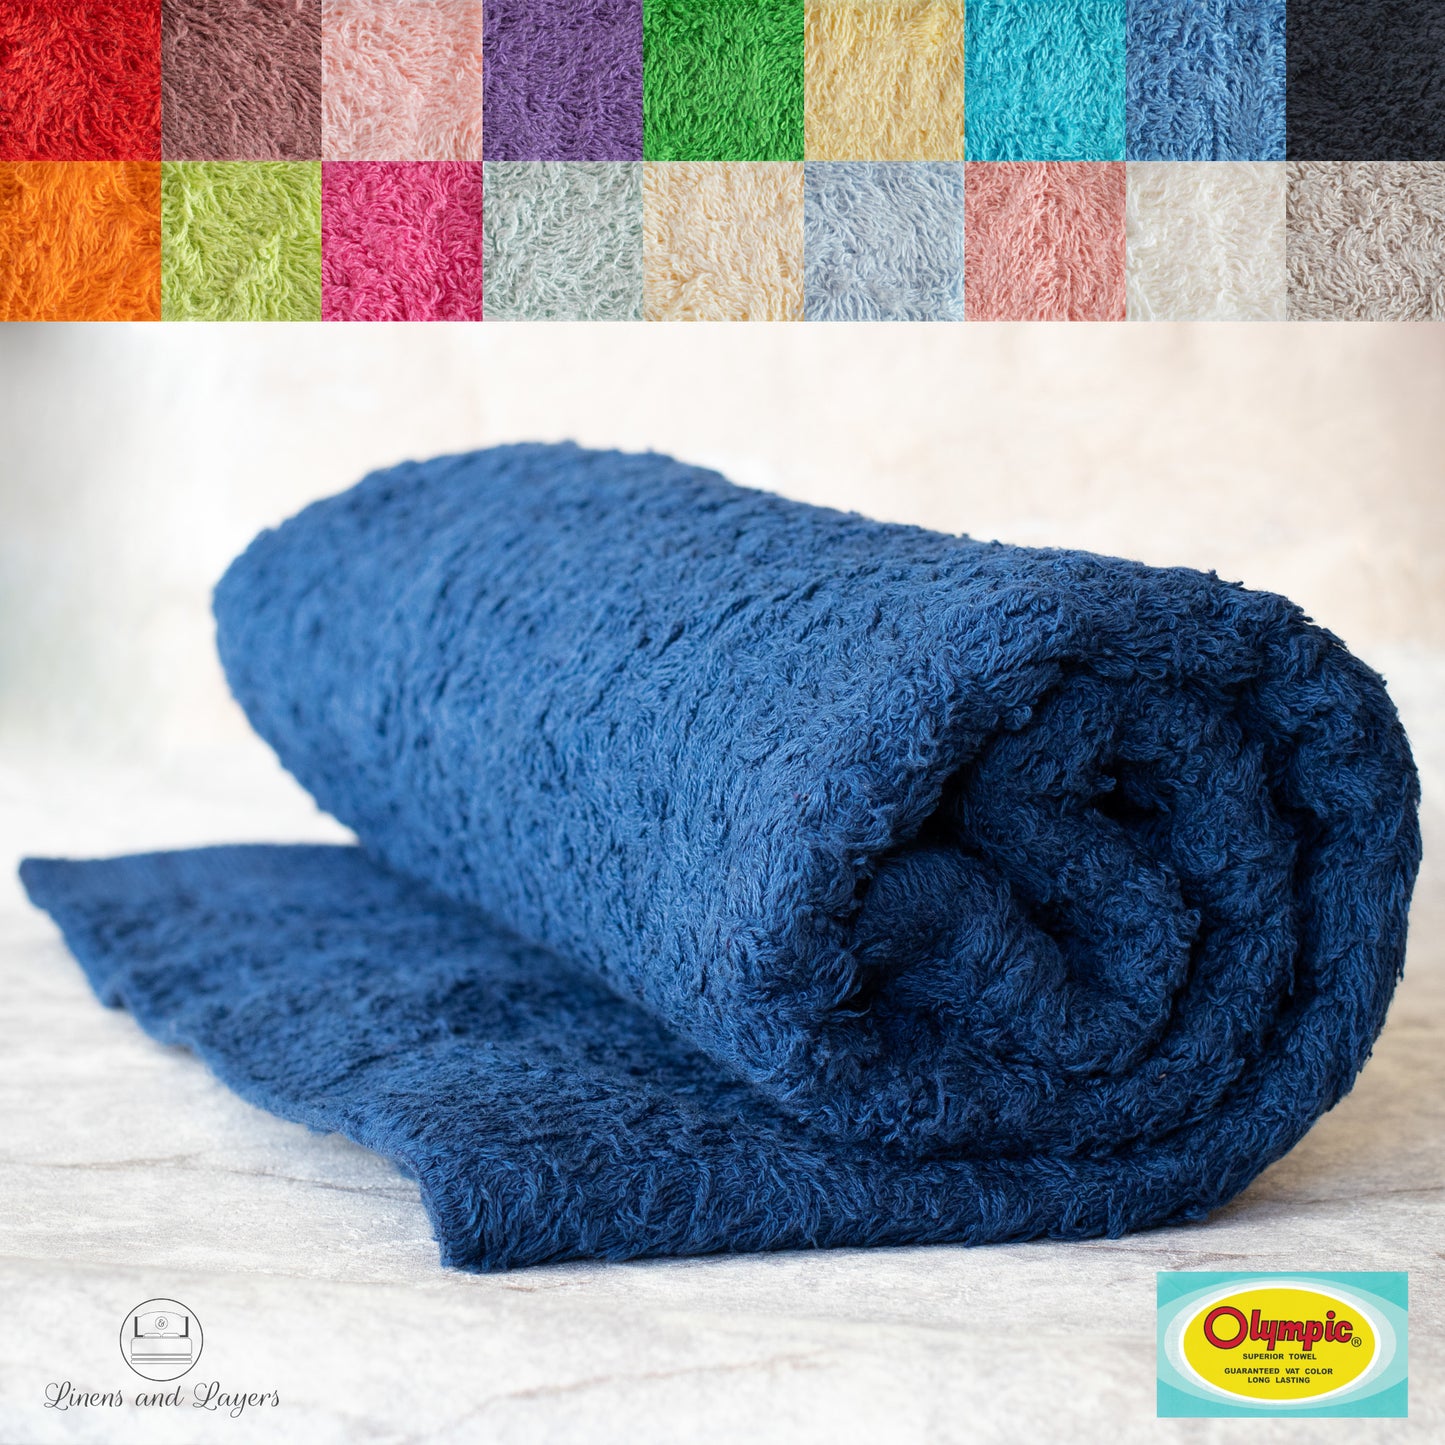 Olympic Bath Towel  (470 GSM) - DK-2550 Terrycloth - 25x50 inches